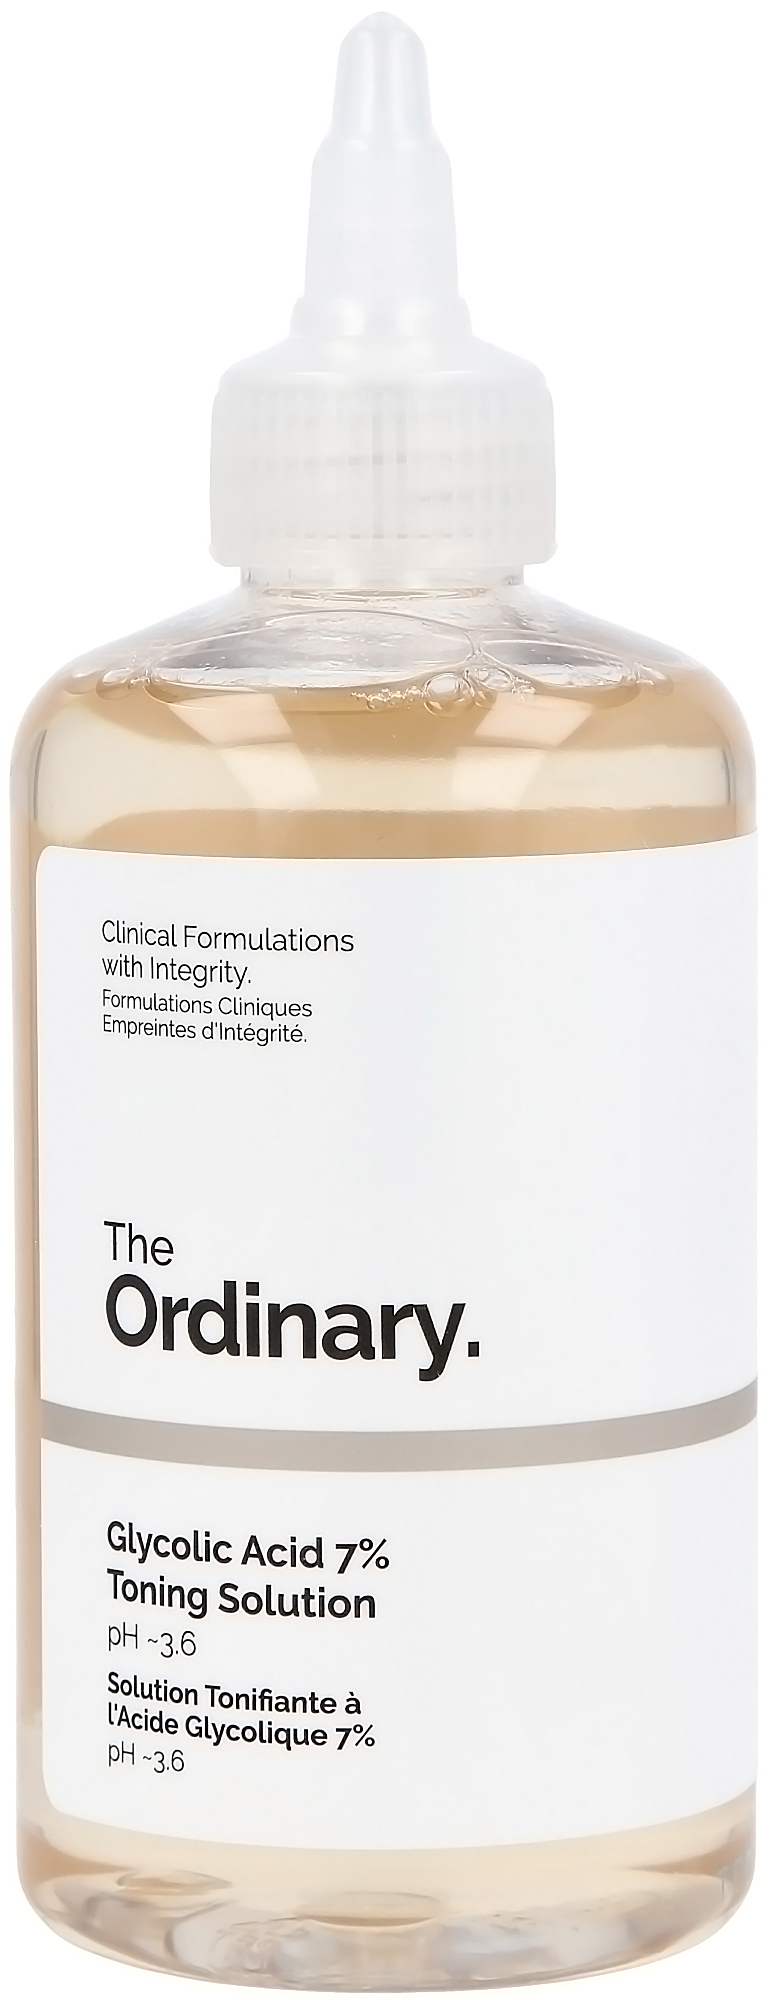 The Ordinary Direct Acids Glycolic Acid 7% Toning Solution 240 ml